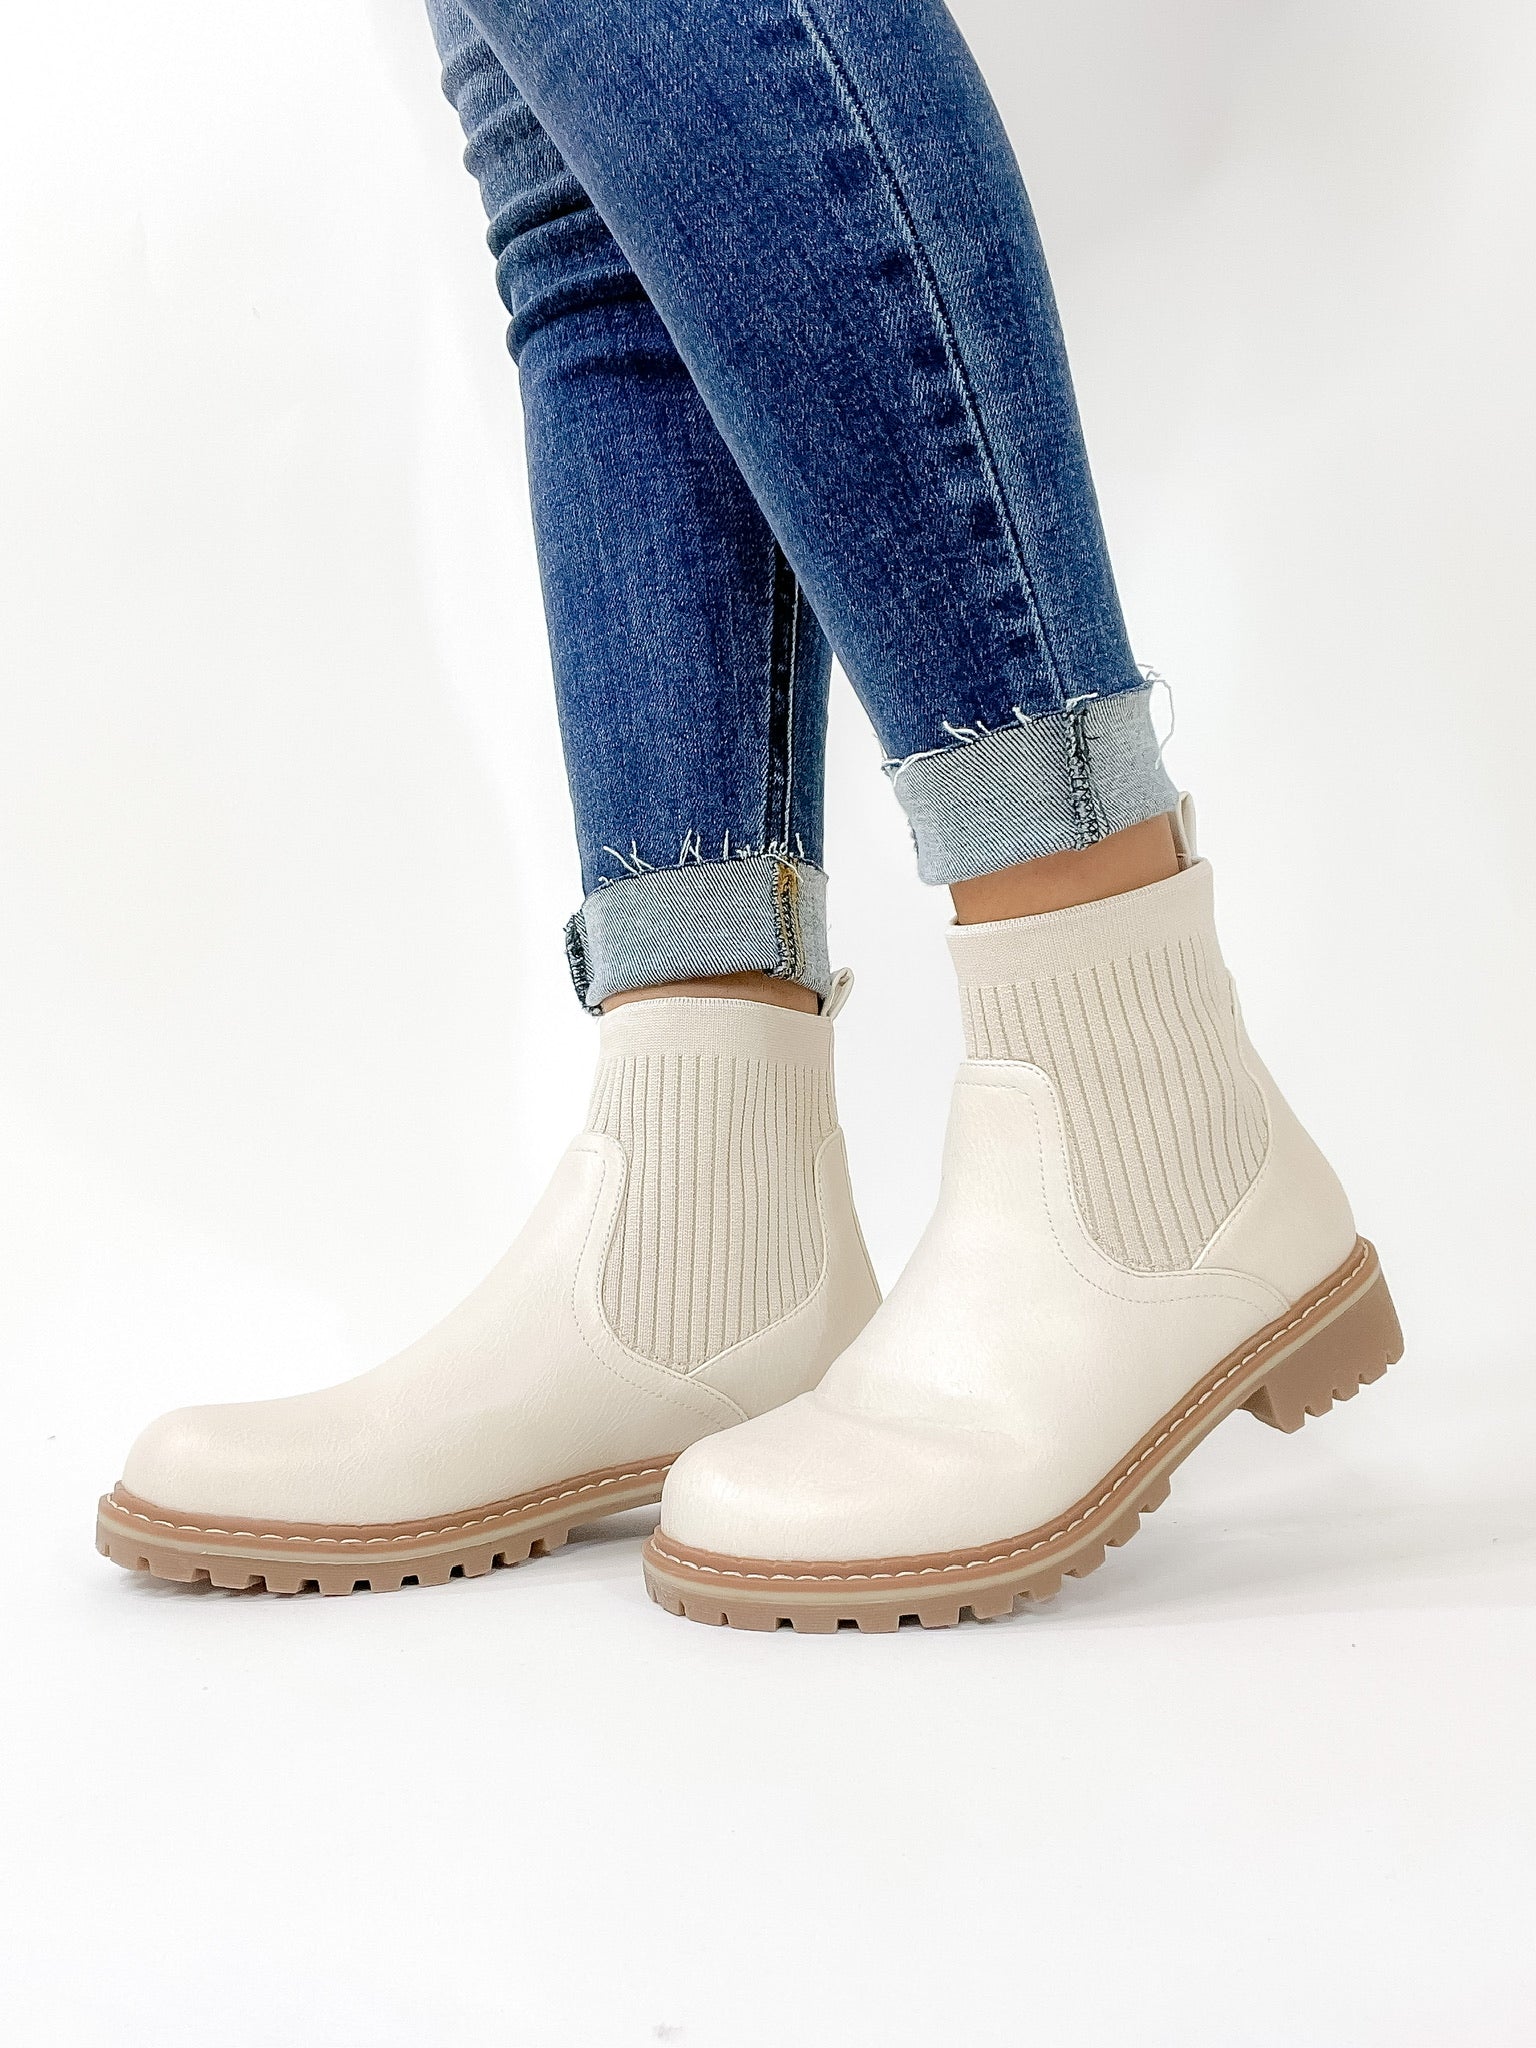 Corky's | Cabin Fever Slip On Booties in Cream - Giddy Up Glamour Boutique